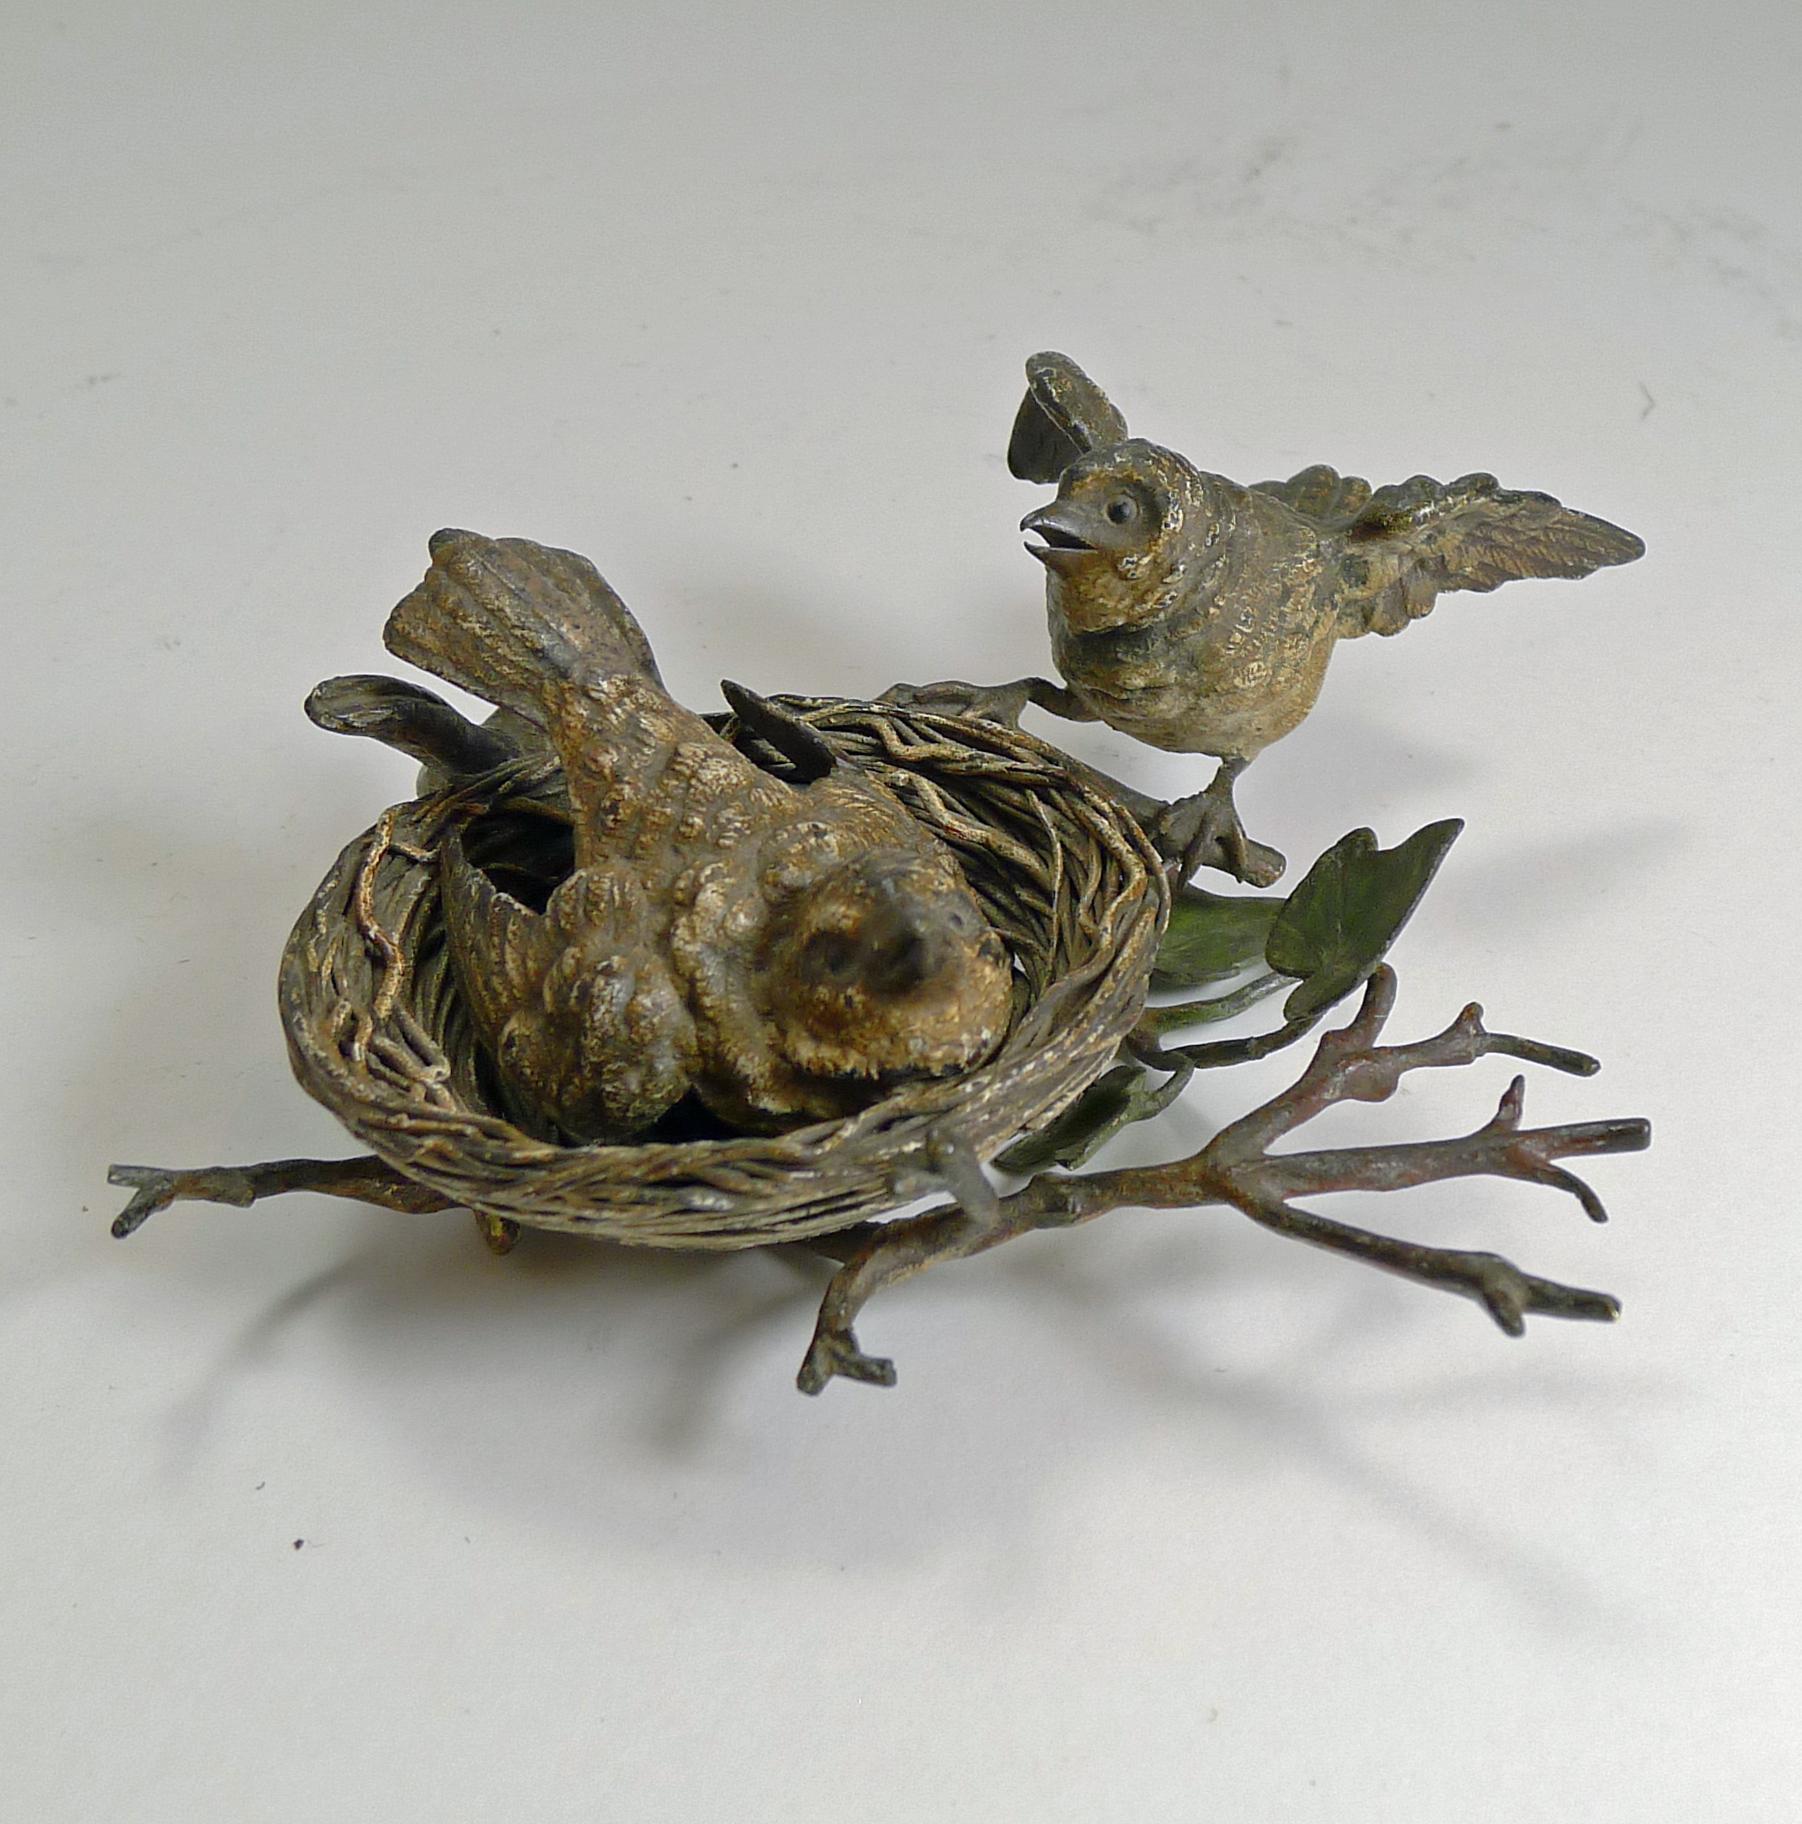 A truly charming cold-painted Vienna figural bronze.

The naturalistic base complete with Ivy leaves, then sits the birds nest with intricate detail and subtle colourings. Inside the nest sits one of the two birds protecting eggs below. The other